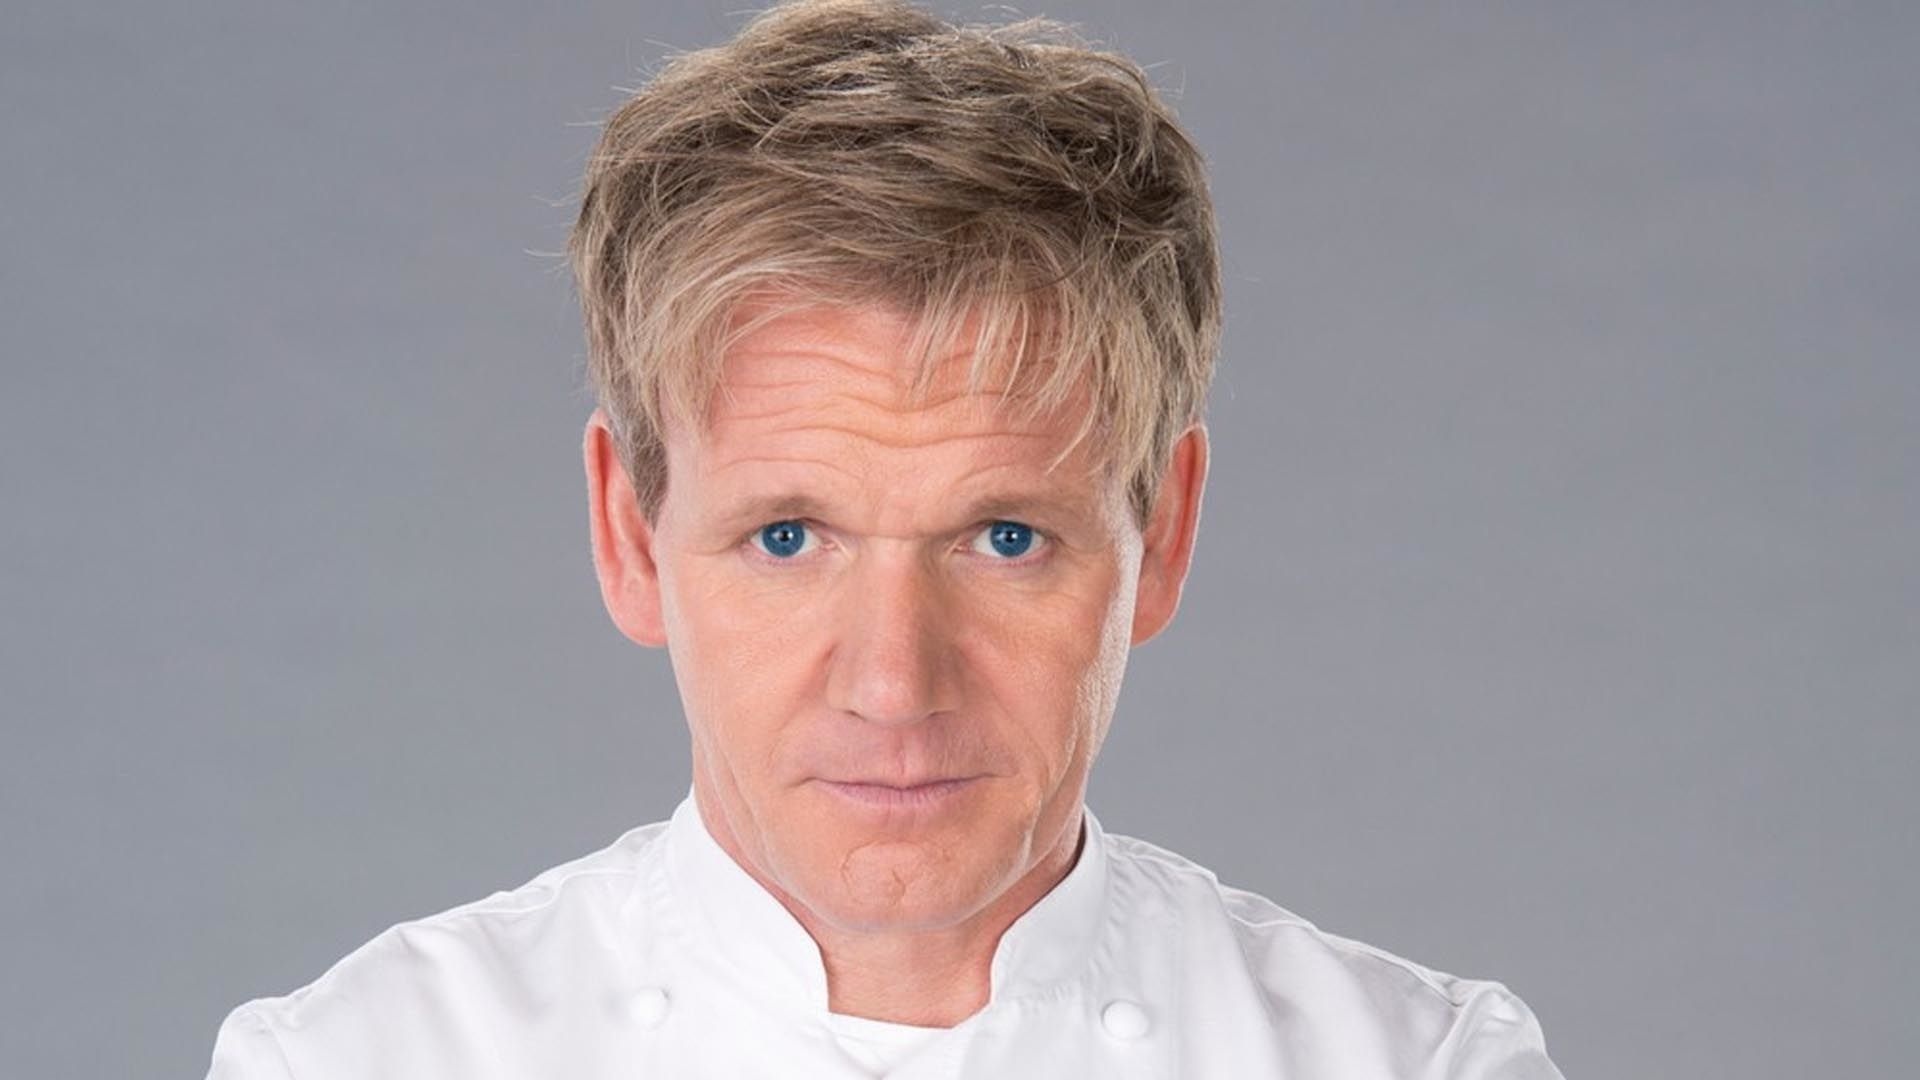 Gordon Ramsay: Known for the profanity and fiery temper that he freely displayed on television cooking programs. 1920x1080 Full HD Background.